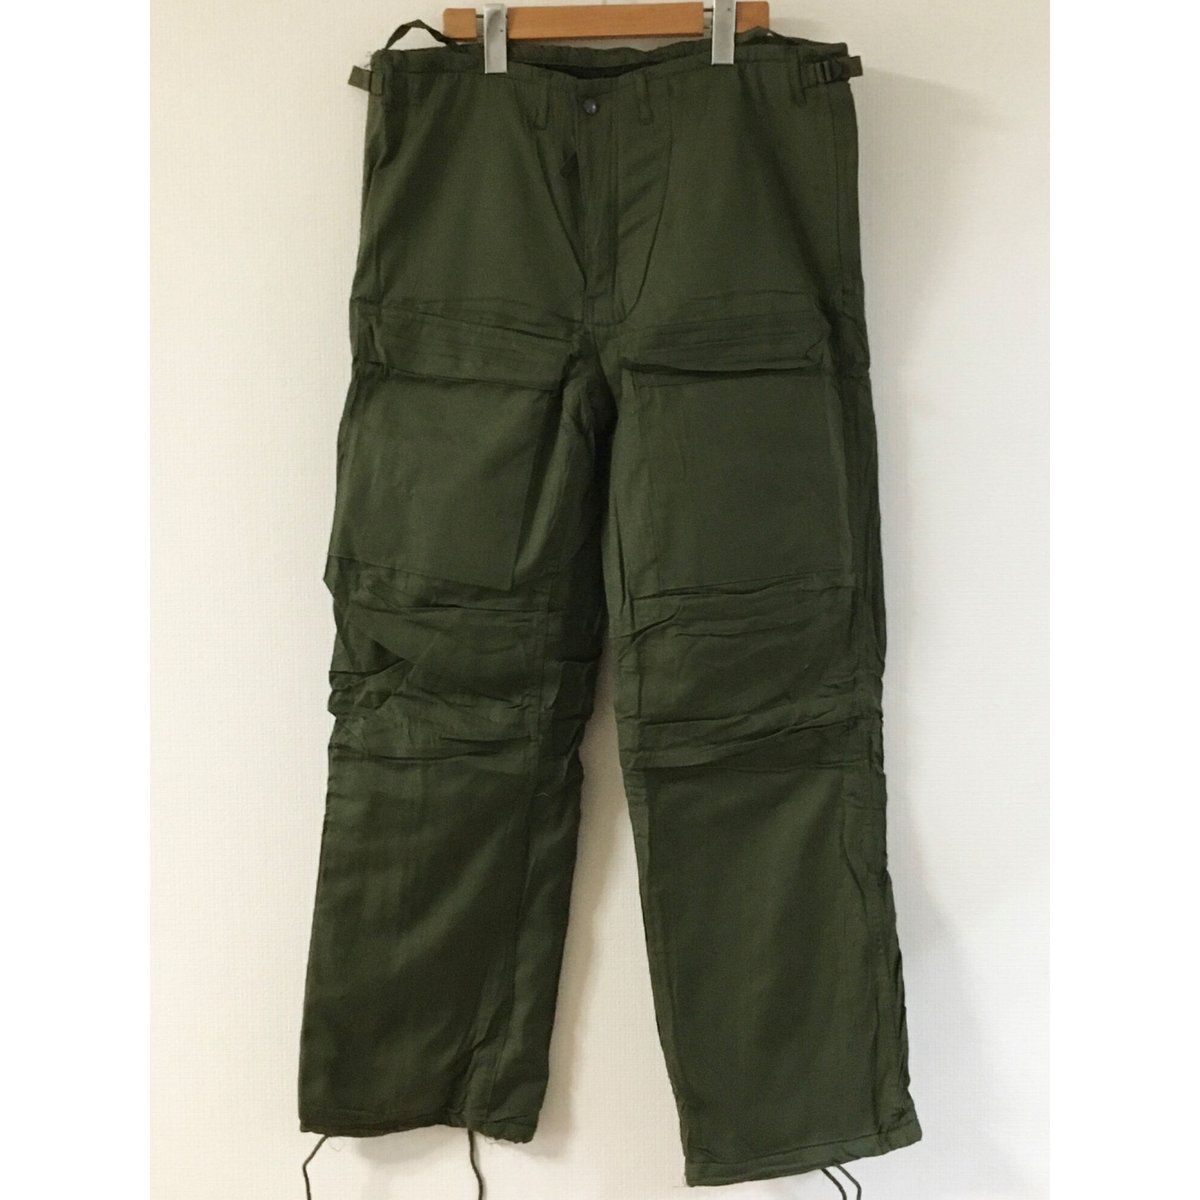 US ARMY アメリカ軍 CHEMICAL PROTECTIVE パンツ